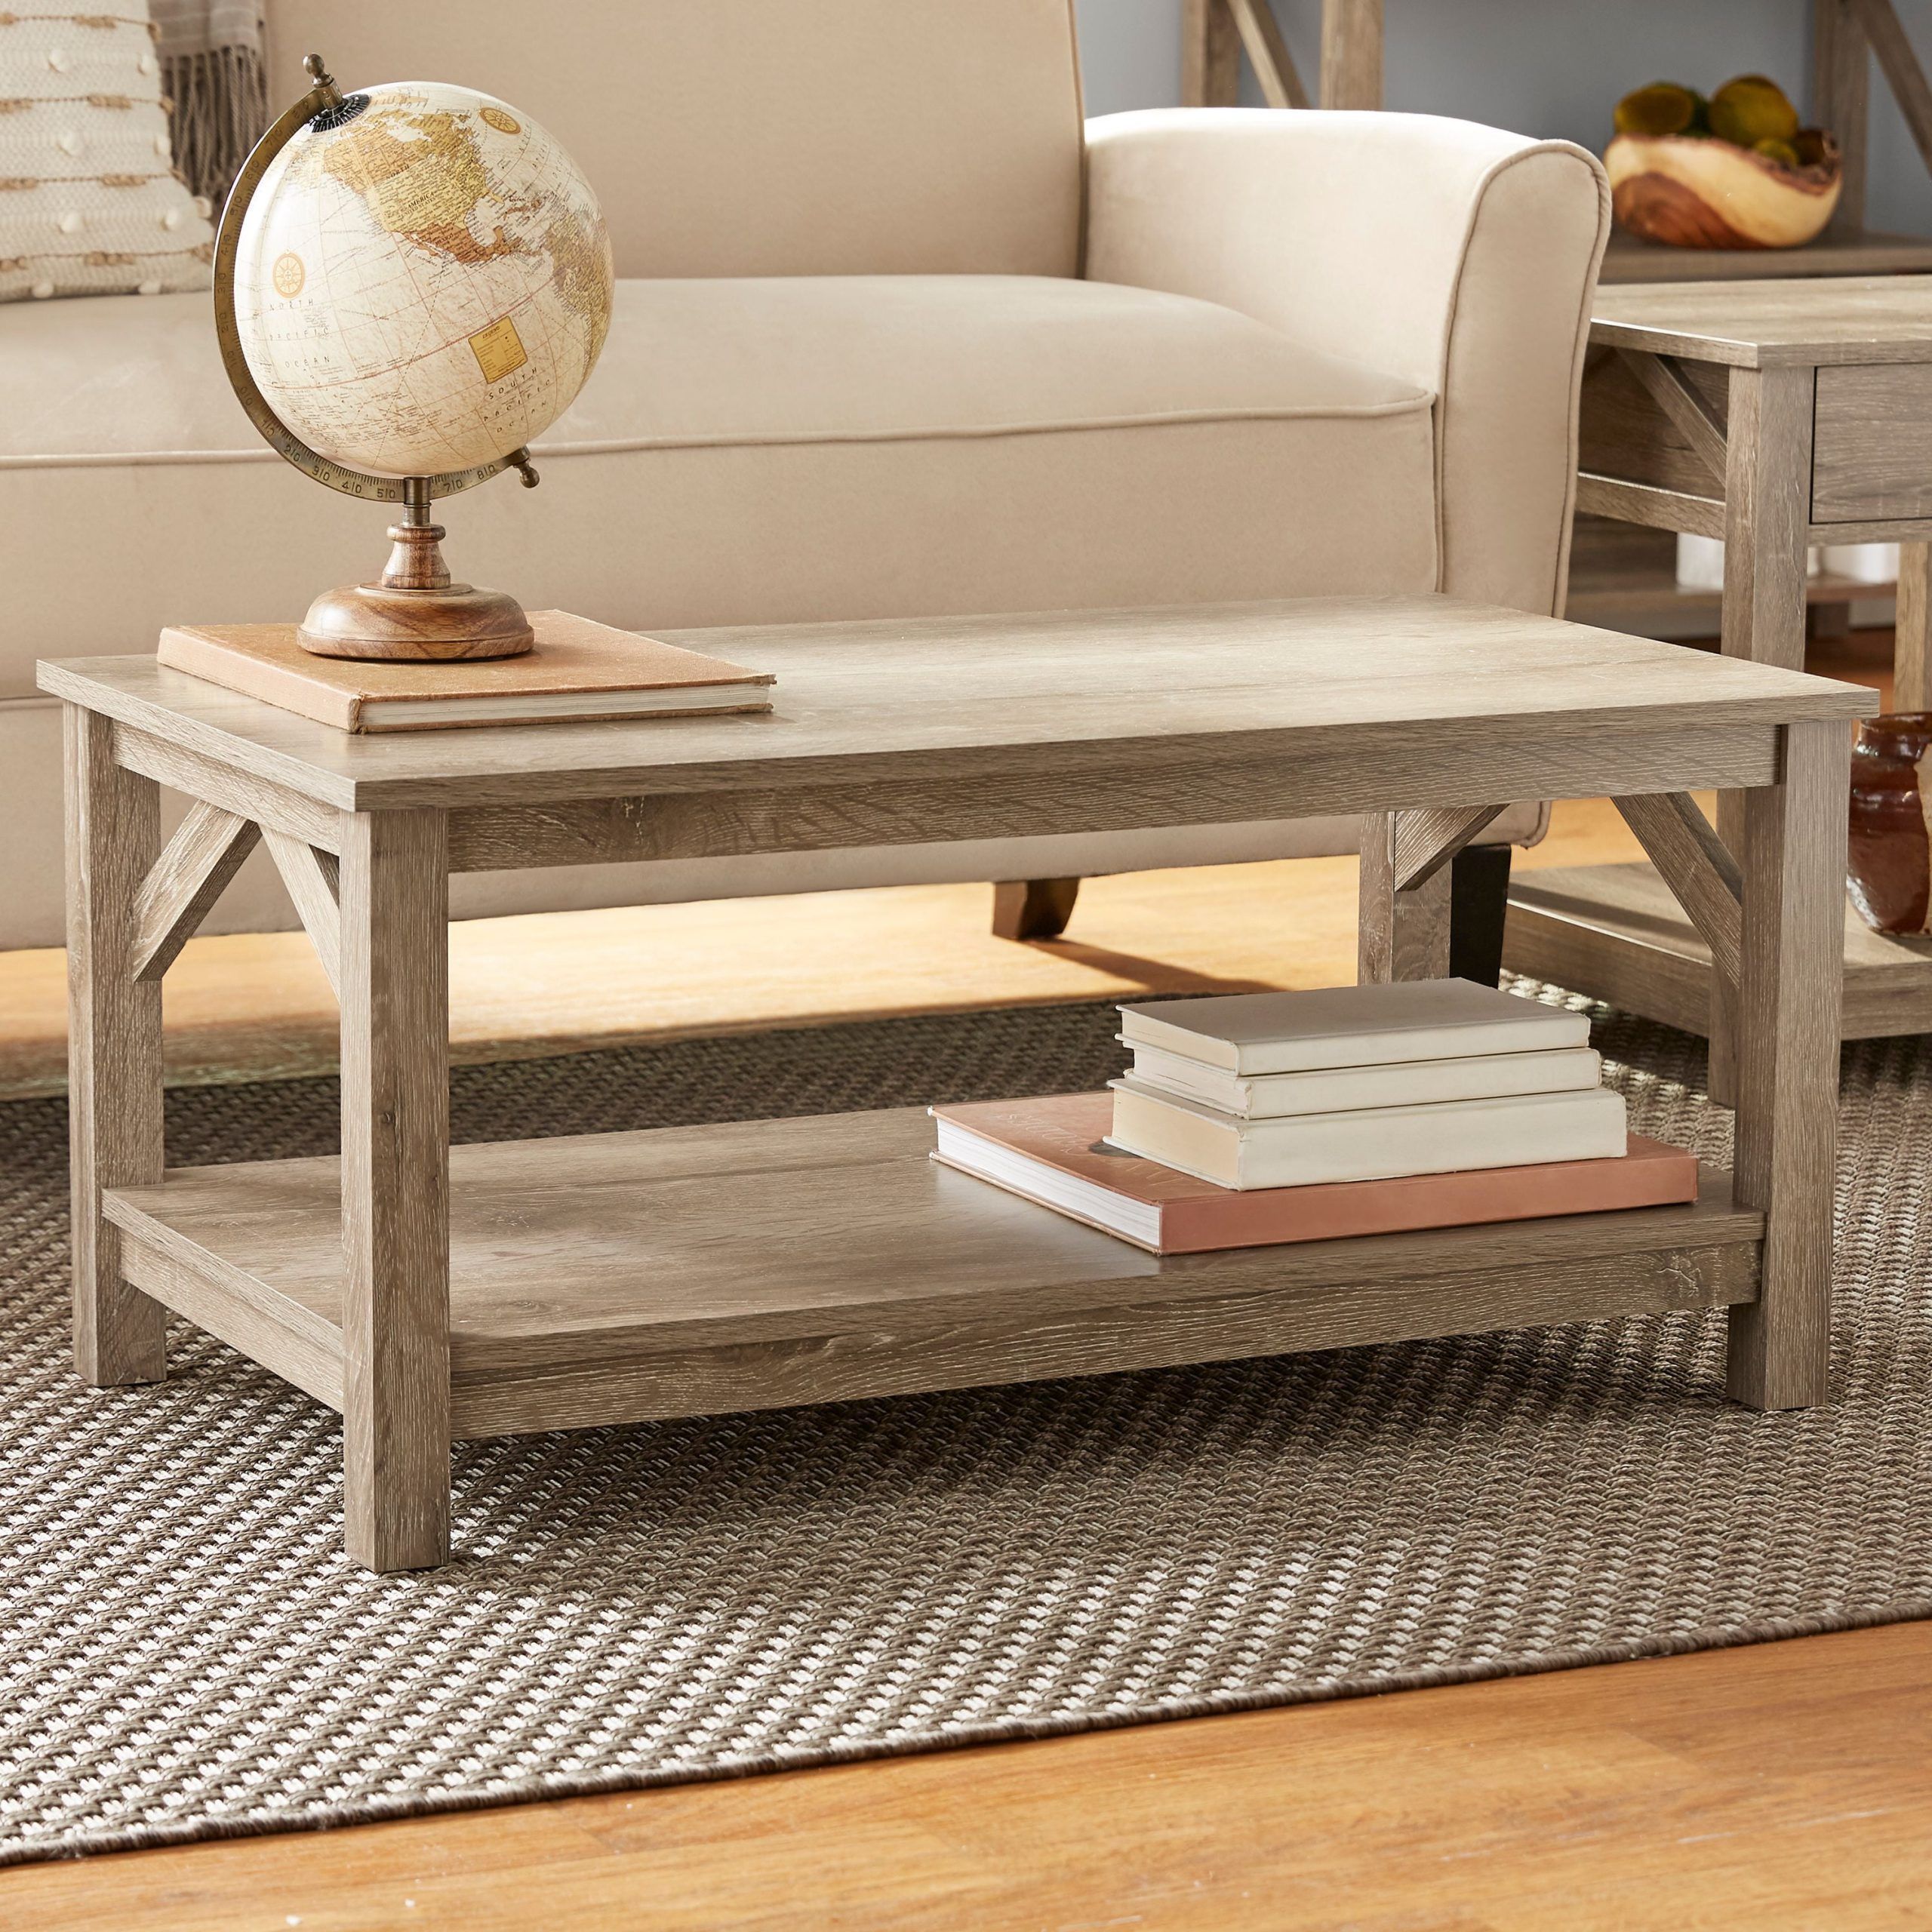 Mainstays Aston Mills Rustic Farmhouse Coffee Table, Rustic Brown For Living Room Farmhouse Coffee Tables (View 13 of 20)